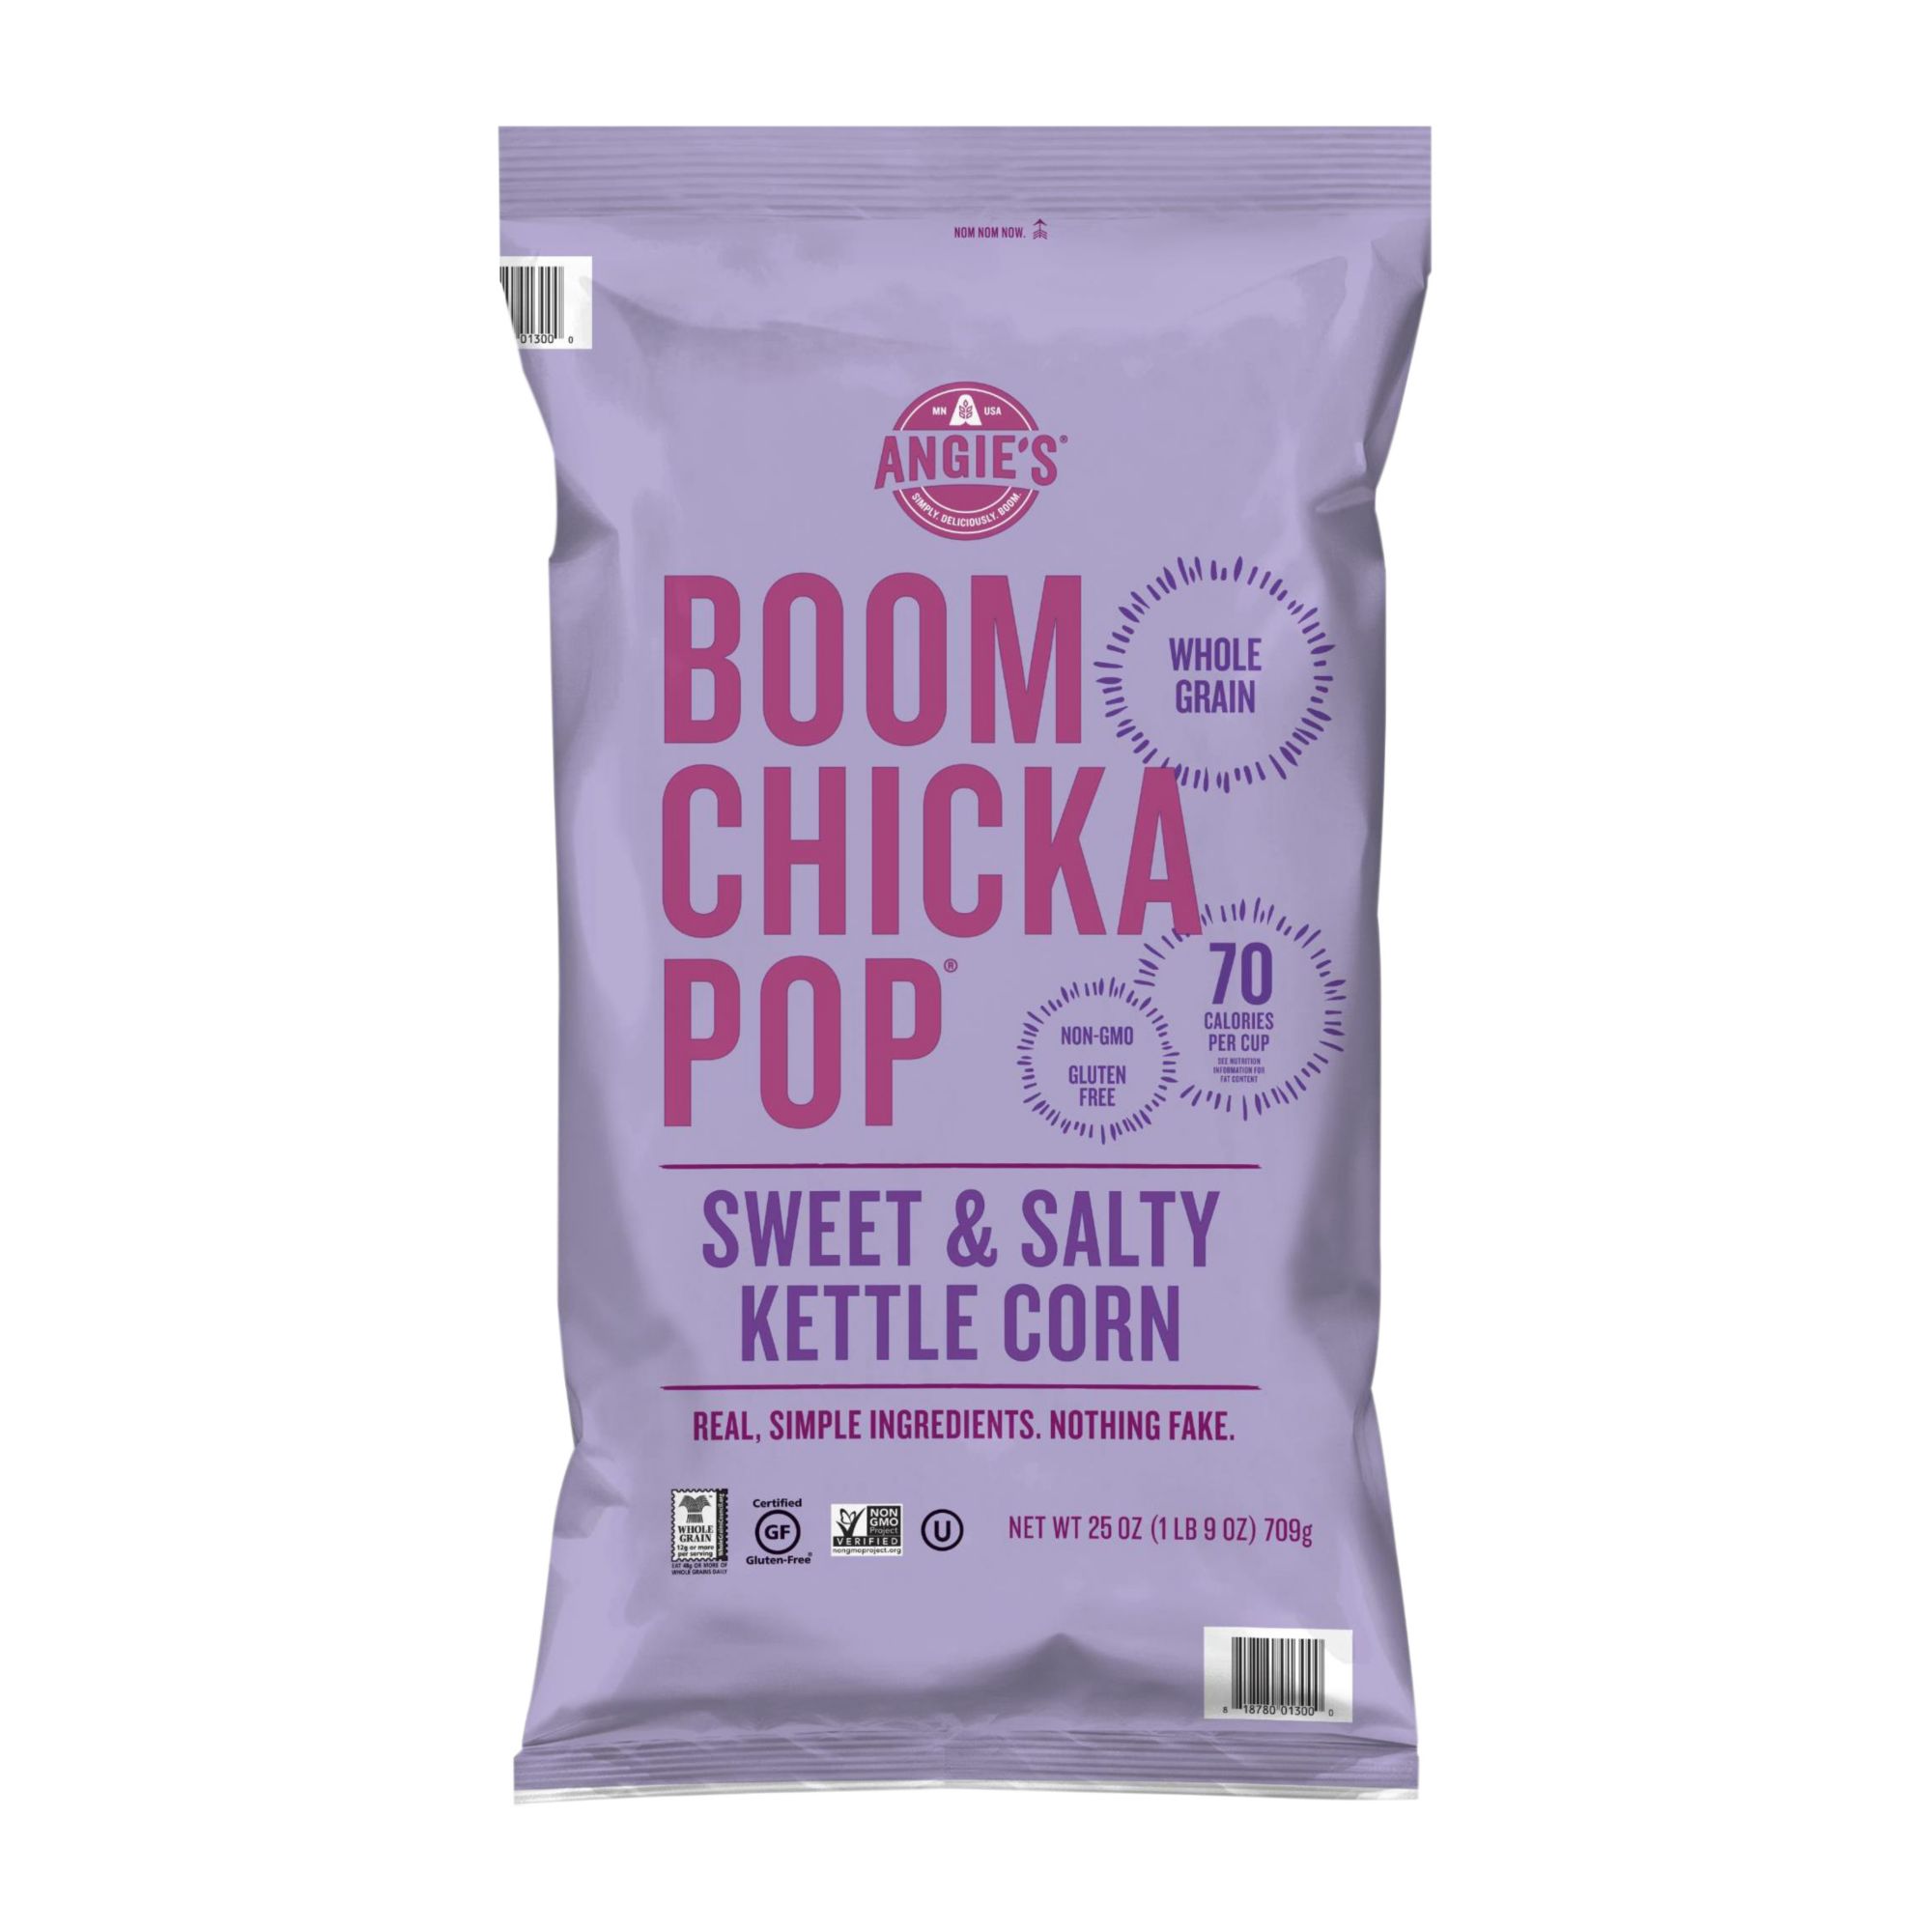 Angie's Boom Chicka Pop Sweet and Salty Kettle Corn, 25 oz.